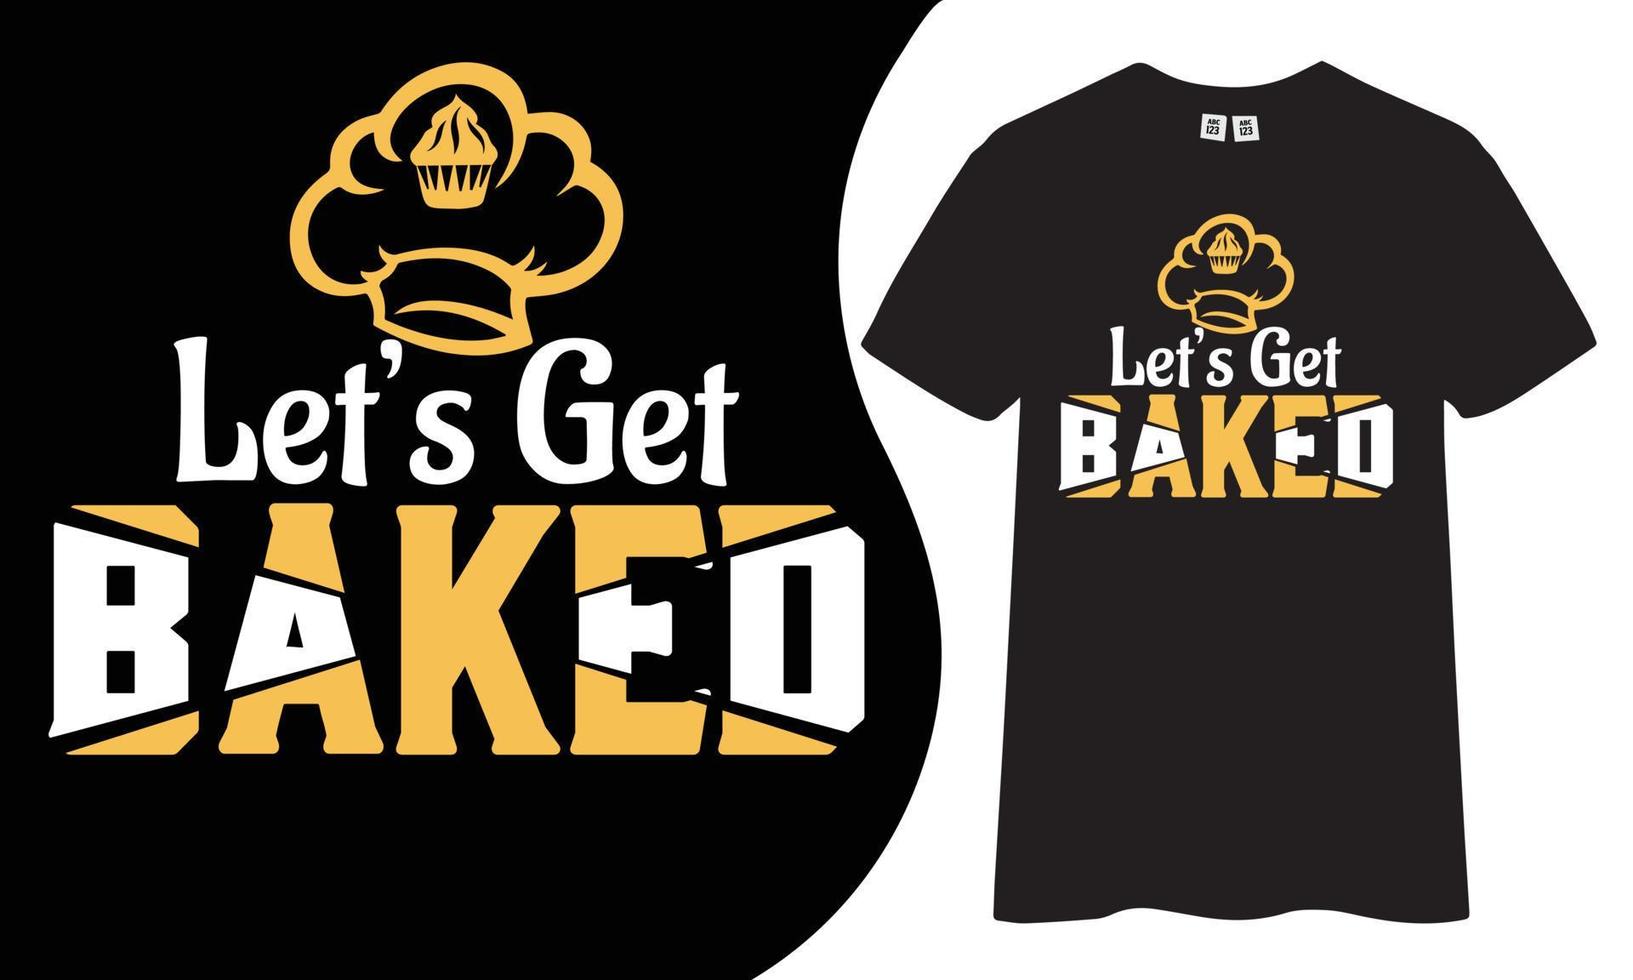 Let's get baked typography logo type t shirt design. vector